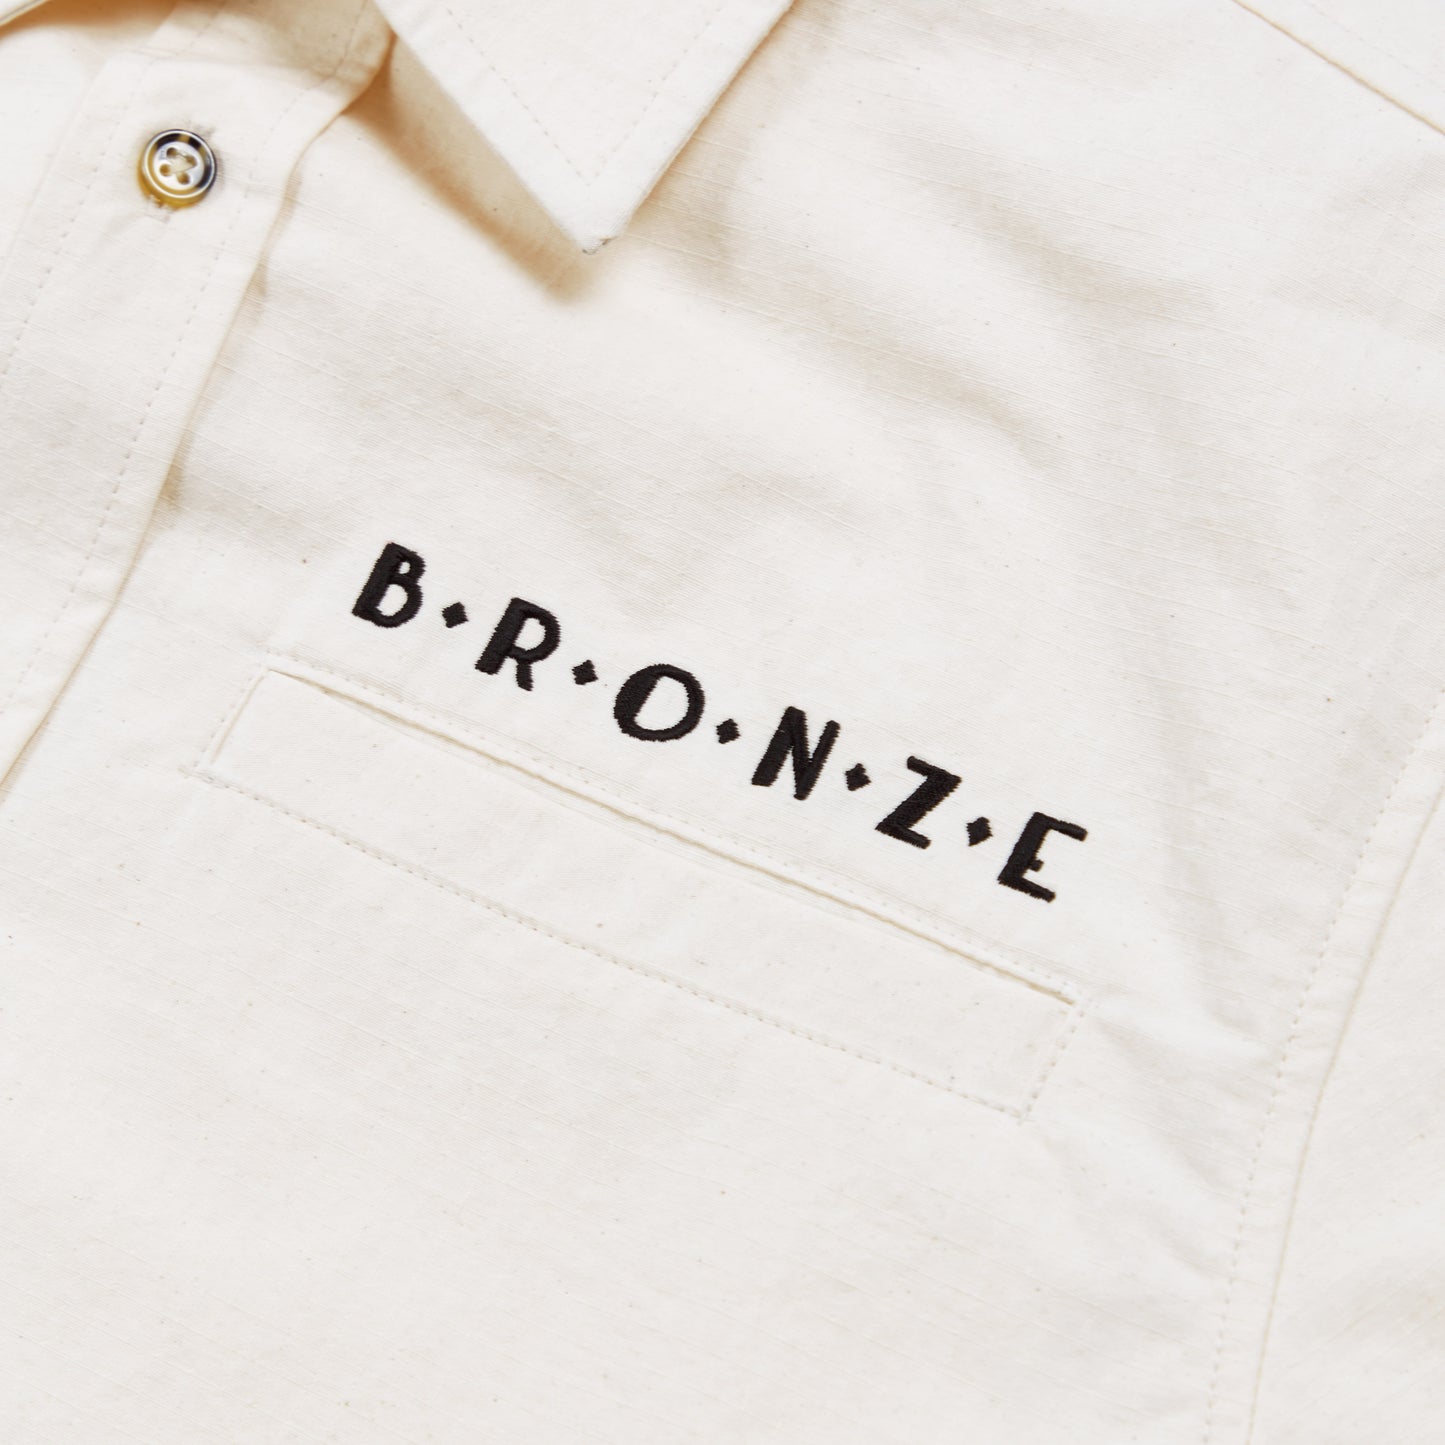 Bronze Ripstop Button Up Ivory